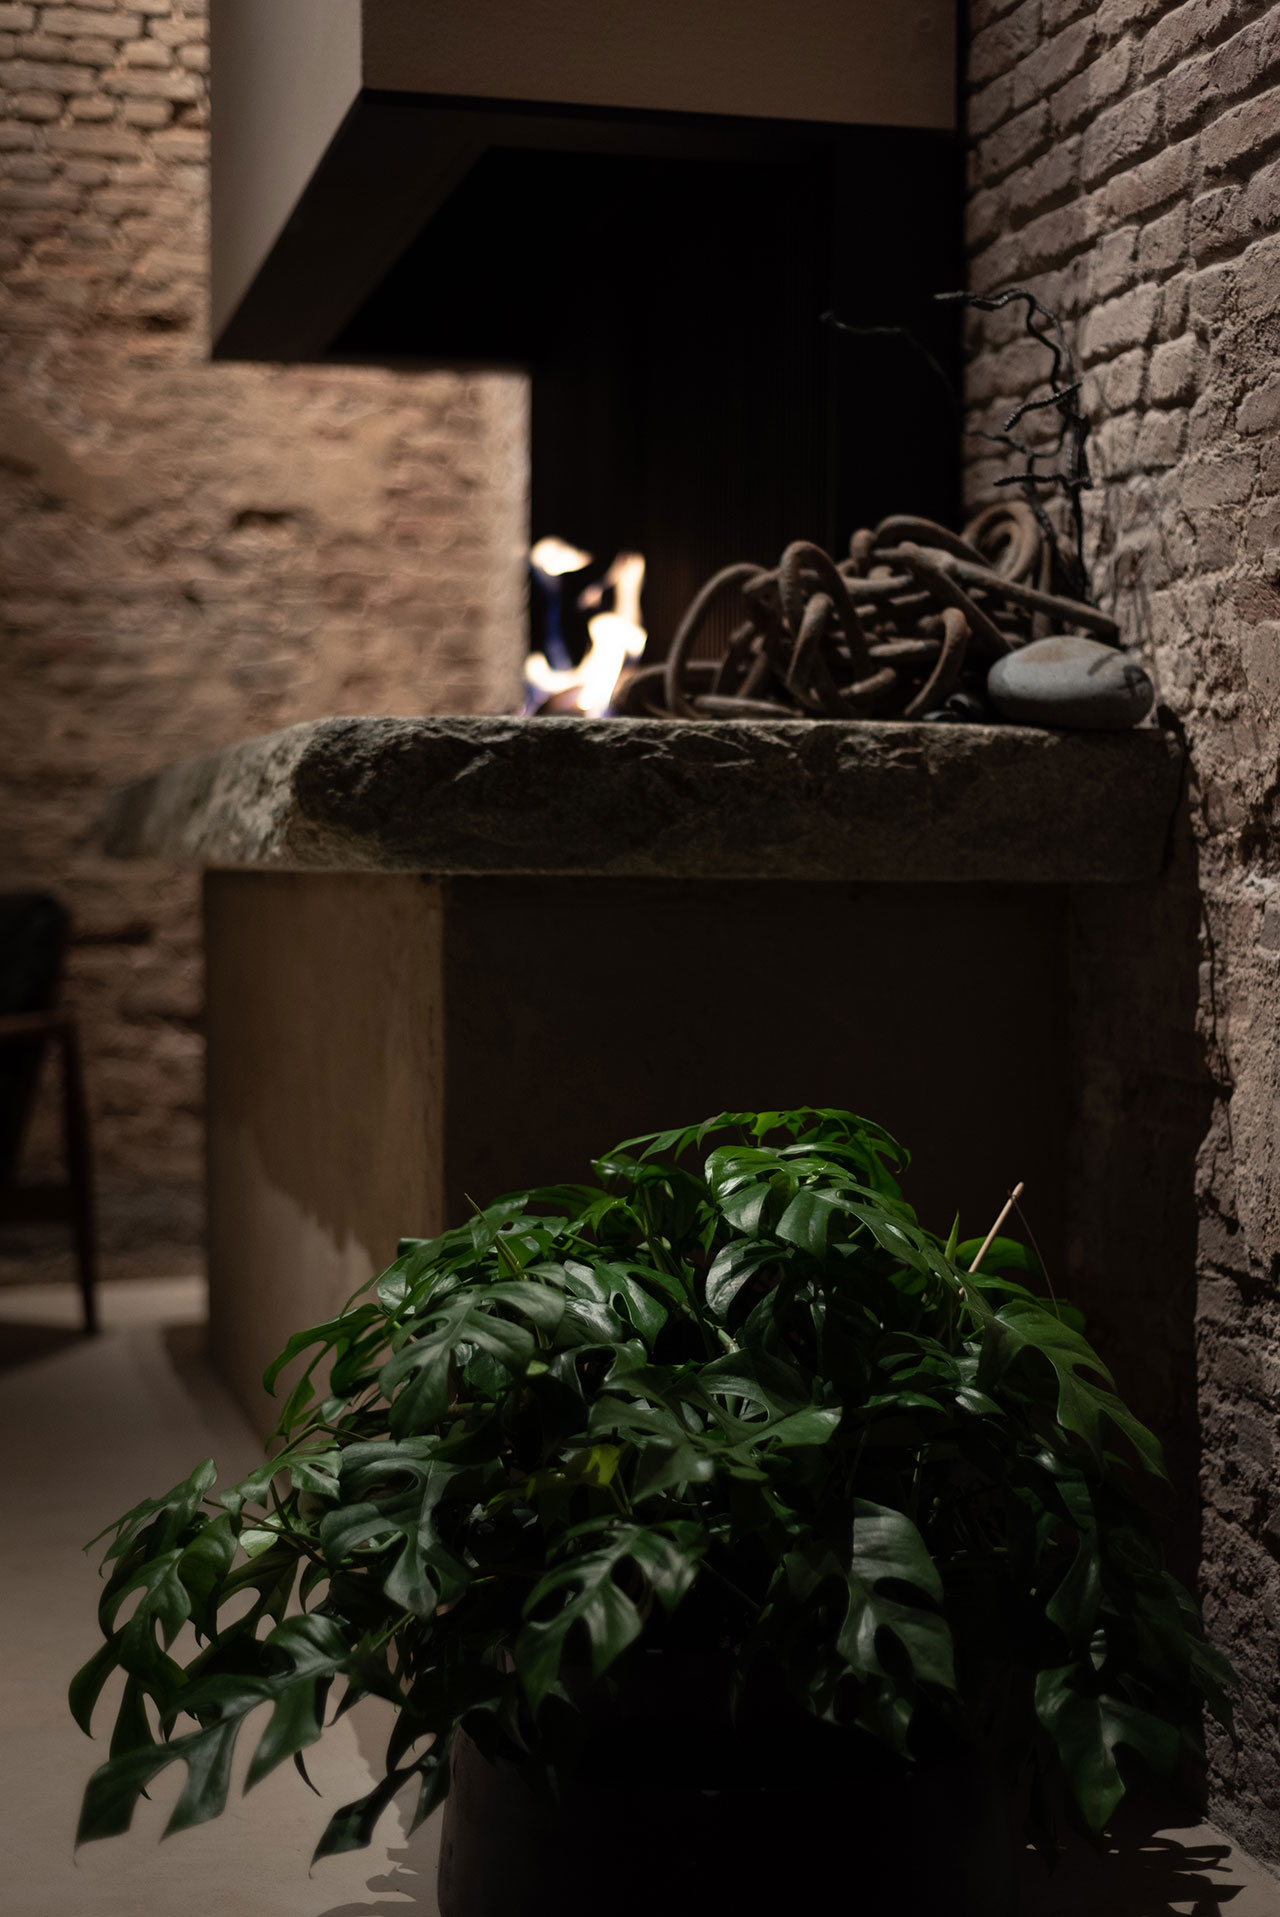 STABLE restaurant designed by Dieter Vander Velpen. Fireplace designed by Arno De Clerck. Photo by Patricia Goijens.